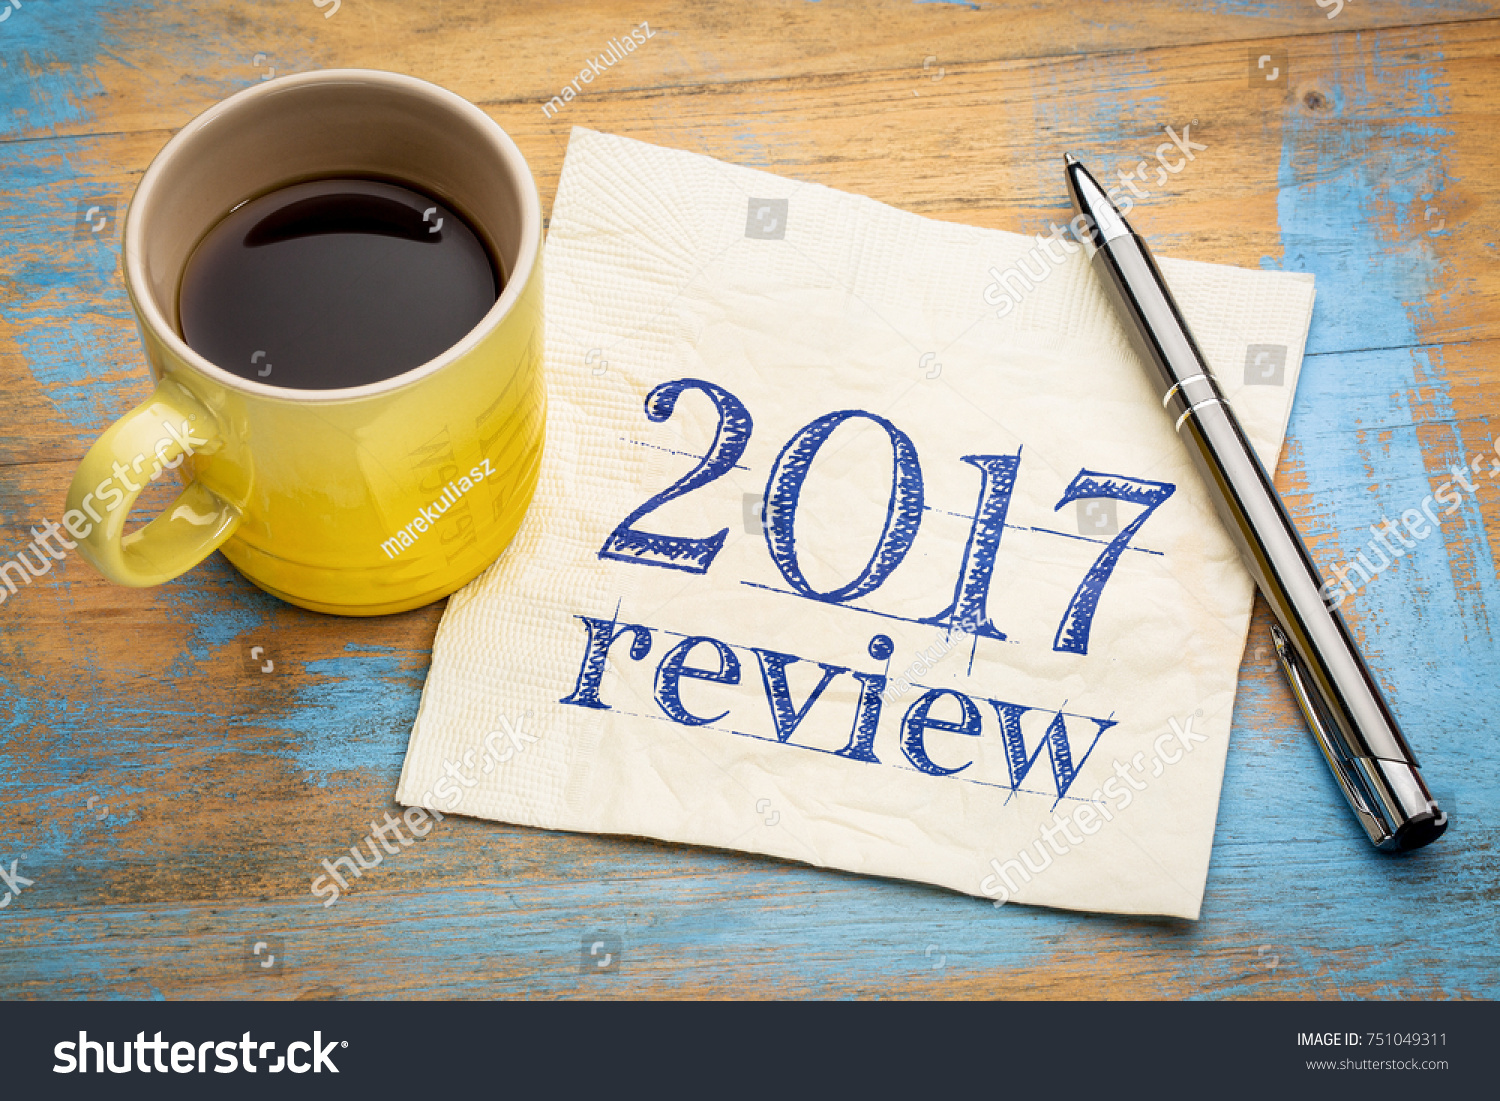 2017 review text on a napkin with coffee against grunge wood desk #751049311